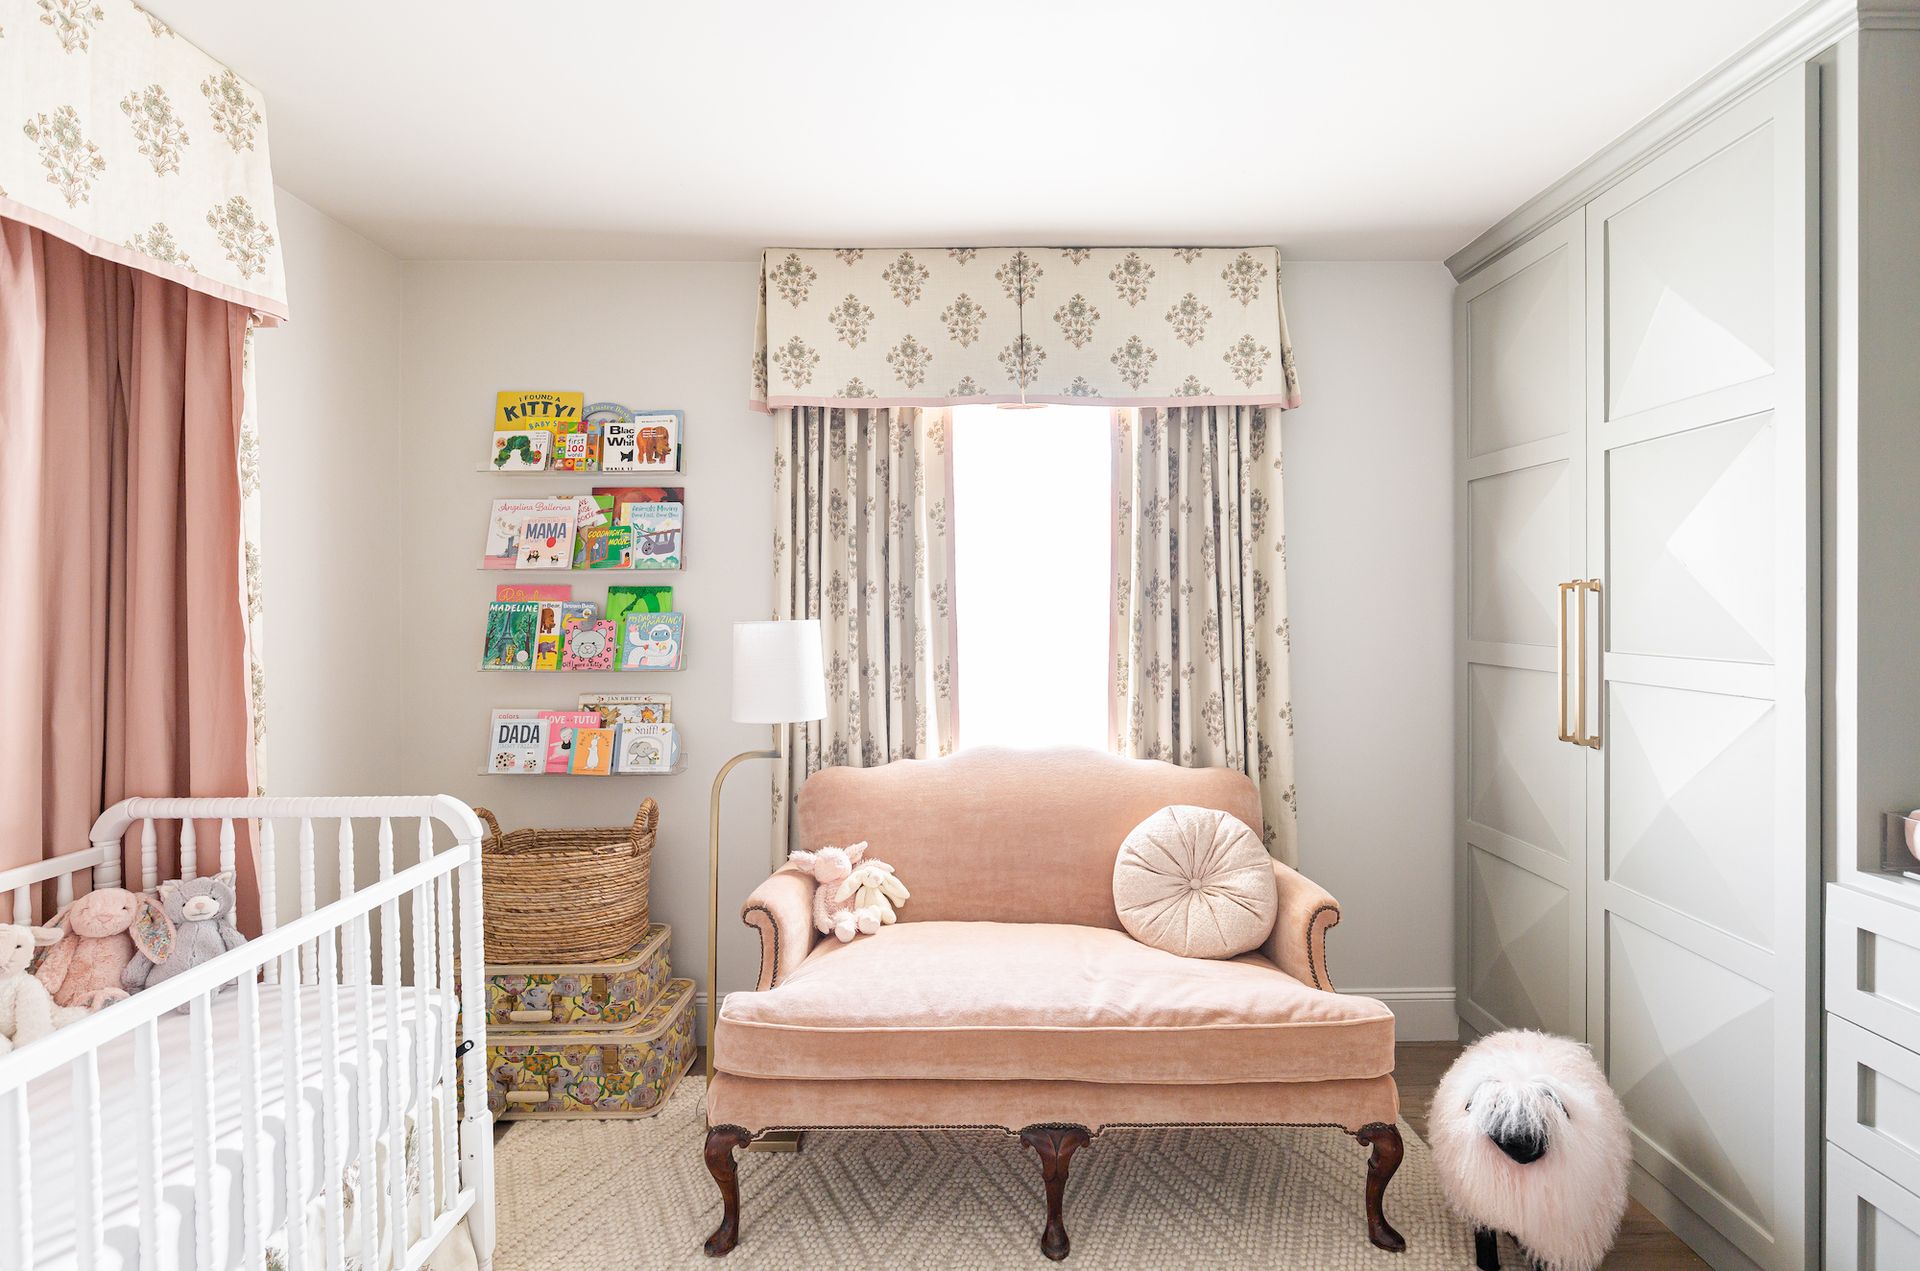 <p>                     'For a truly elegant feel, invest in custom drapery in a subtle print with contrasting blush lining that matches heirloom pieces like this antique settee,' says Melanie Griffiths, editor, <em>Period Living</em>. 'For organizing a nursery, cabinetry is key for storing clothes and bedlinen, and add in those special pieces from your own childhood like vintage trunks and favorite story books.'                   </p>